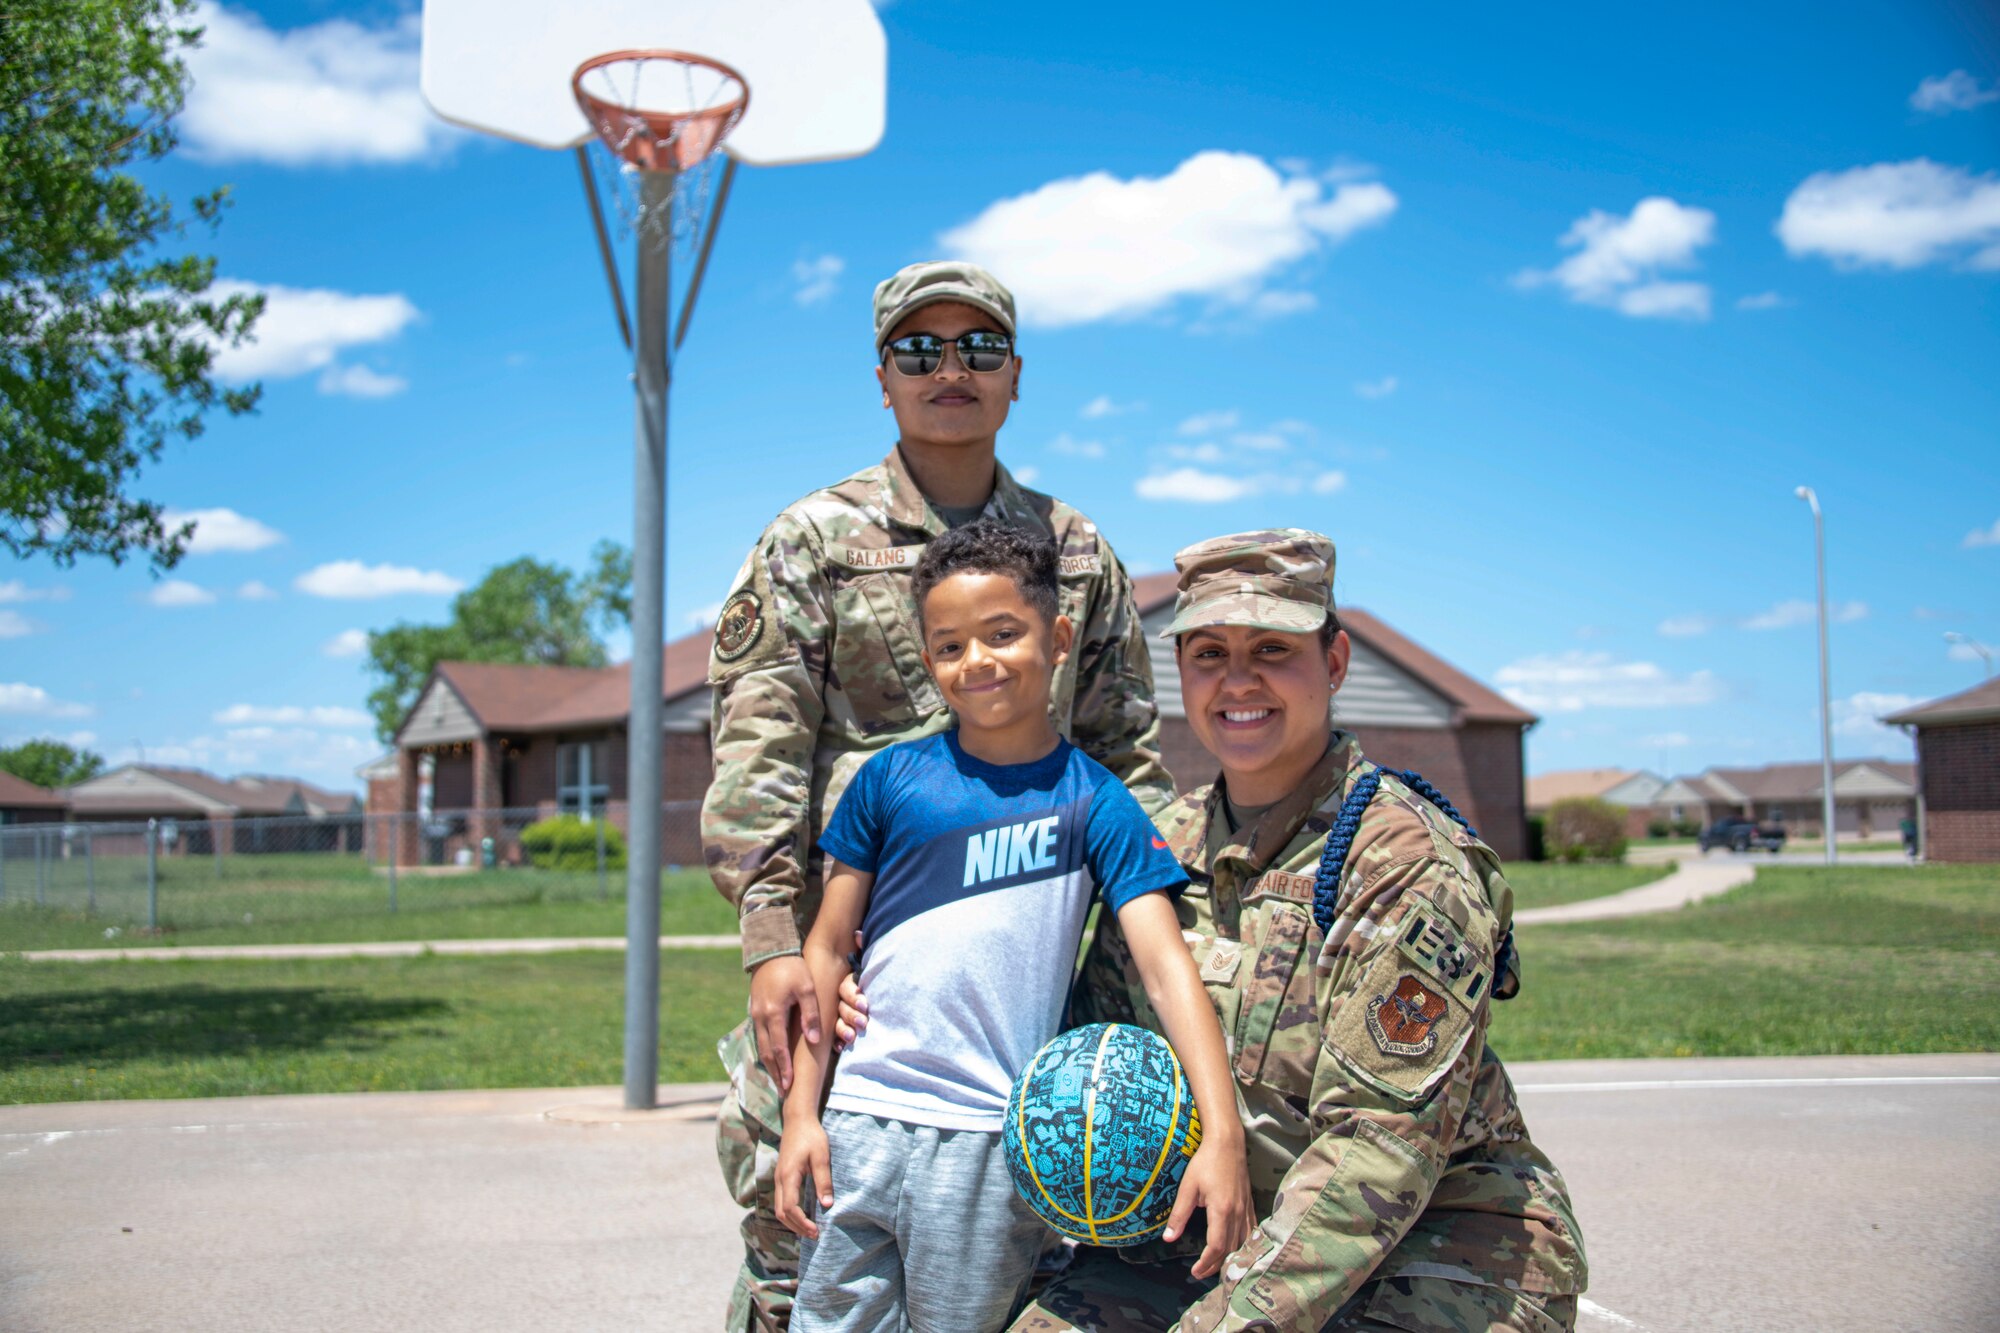 Left, Staff Sgt. Lucille Galang, 97th Communications Squadron base equipment custodian, and Tech Sgt. Kylee Galang, 97th Training Squadron military training leader, pose for a photo with their son, May 4, 2021, at Altus Air Force Base, Oklahoma. Their motto as parents is to “be the mother you want your child to remember,” by showing their son everyday how much they love him. Their advice to other moms is to take care of themselves so their children can have them at their best. (U.S. Air Force photo by Staff Sgt. Cody Dowell)